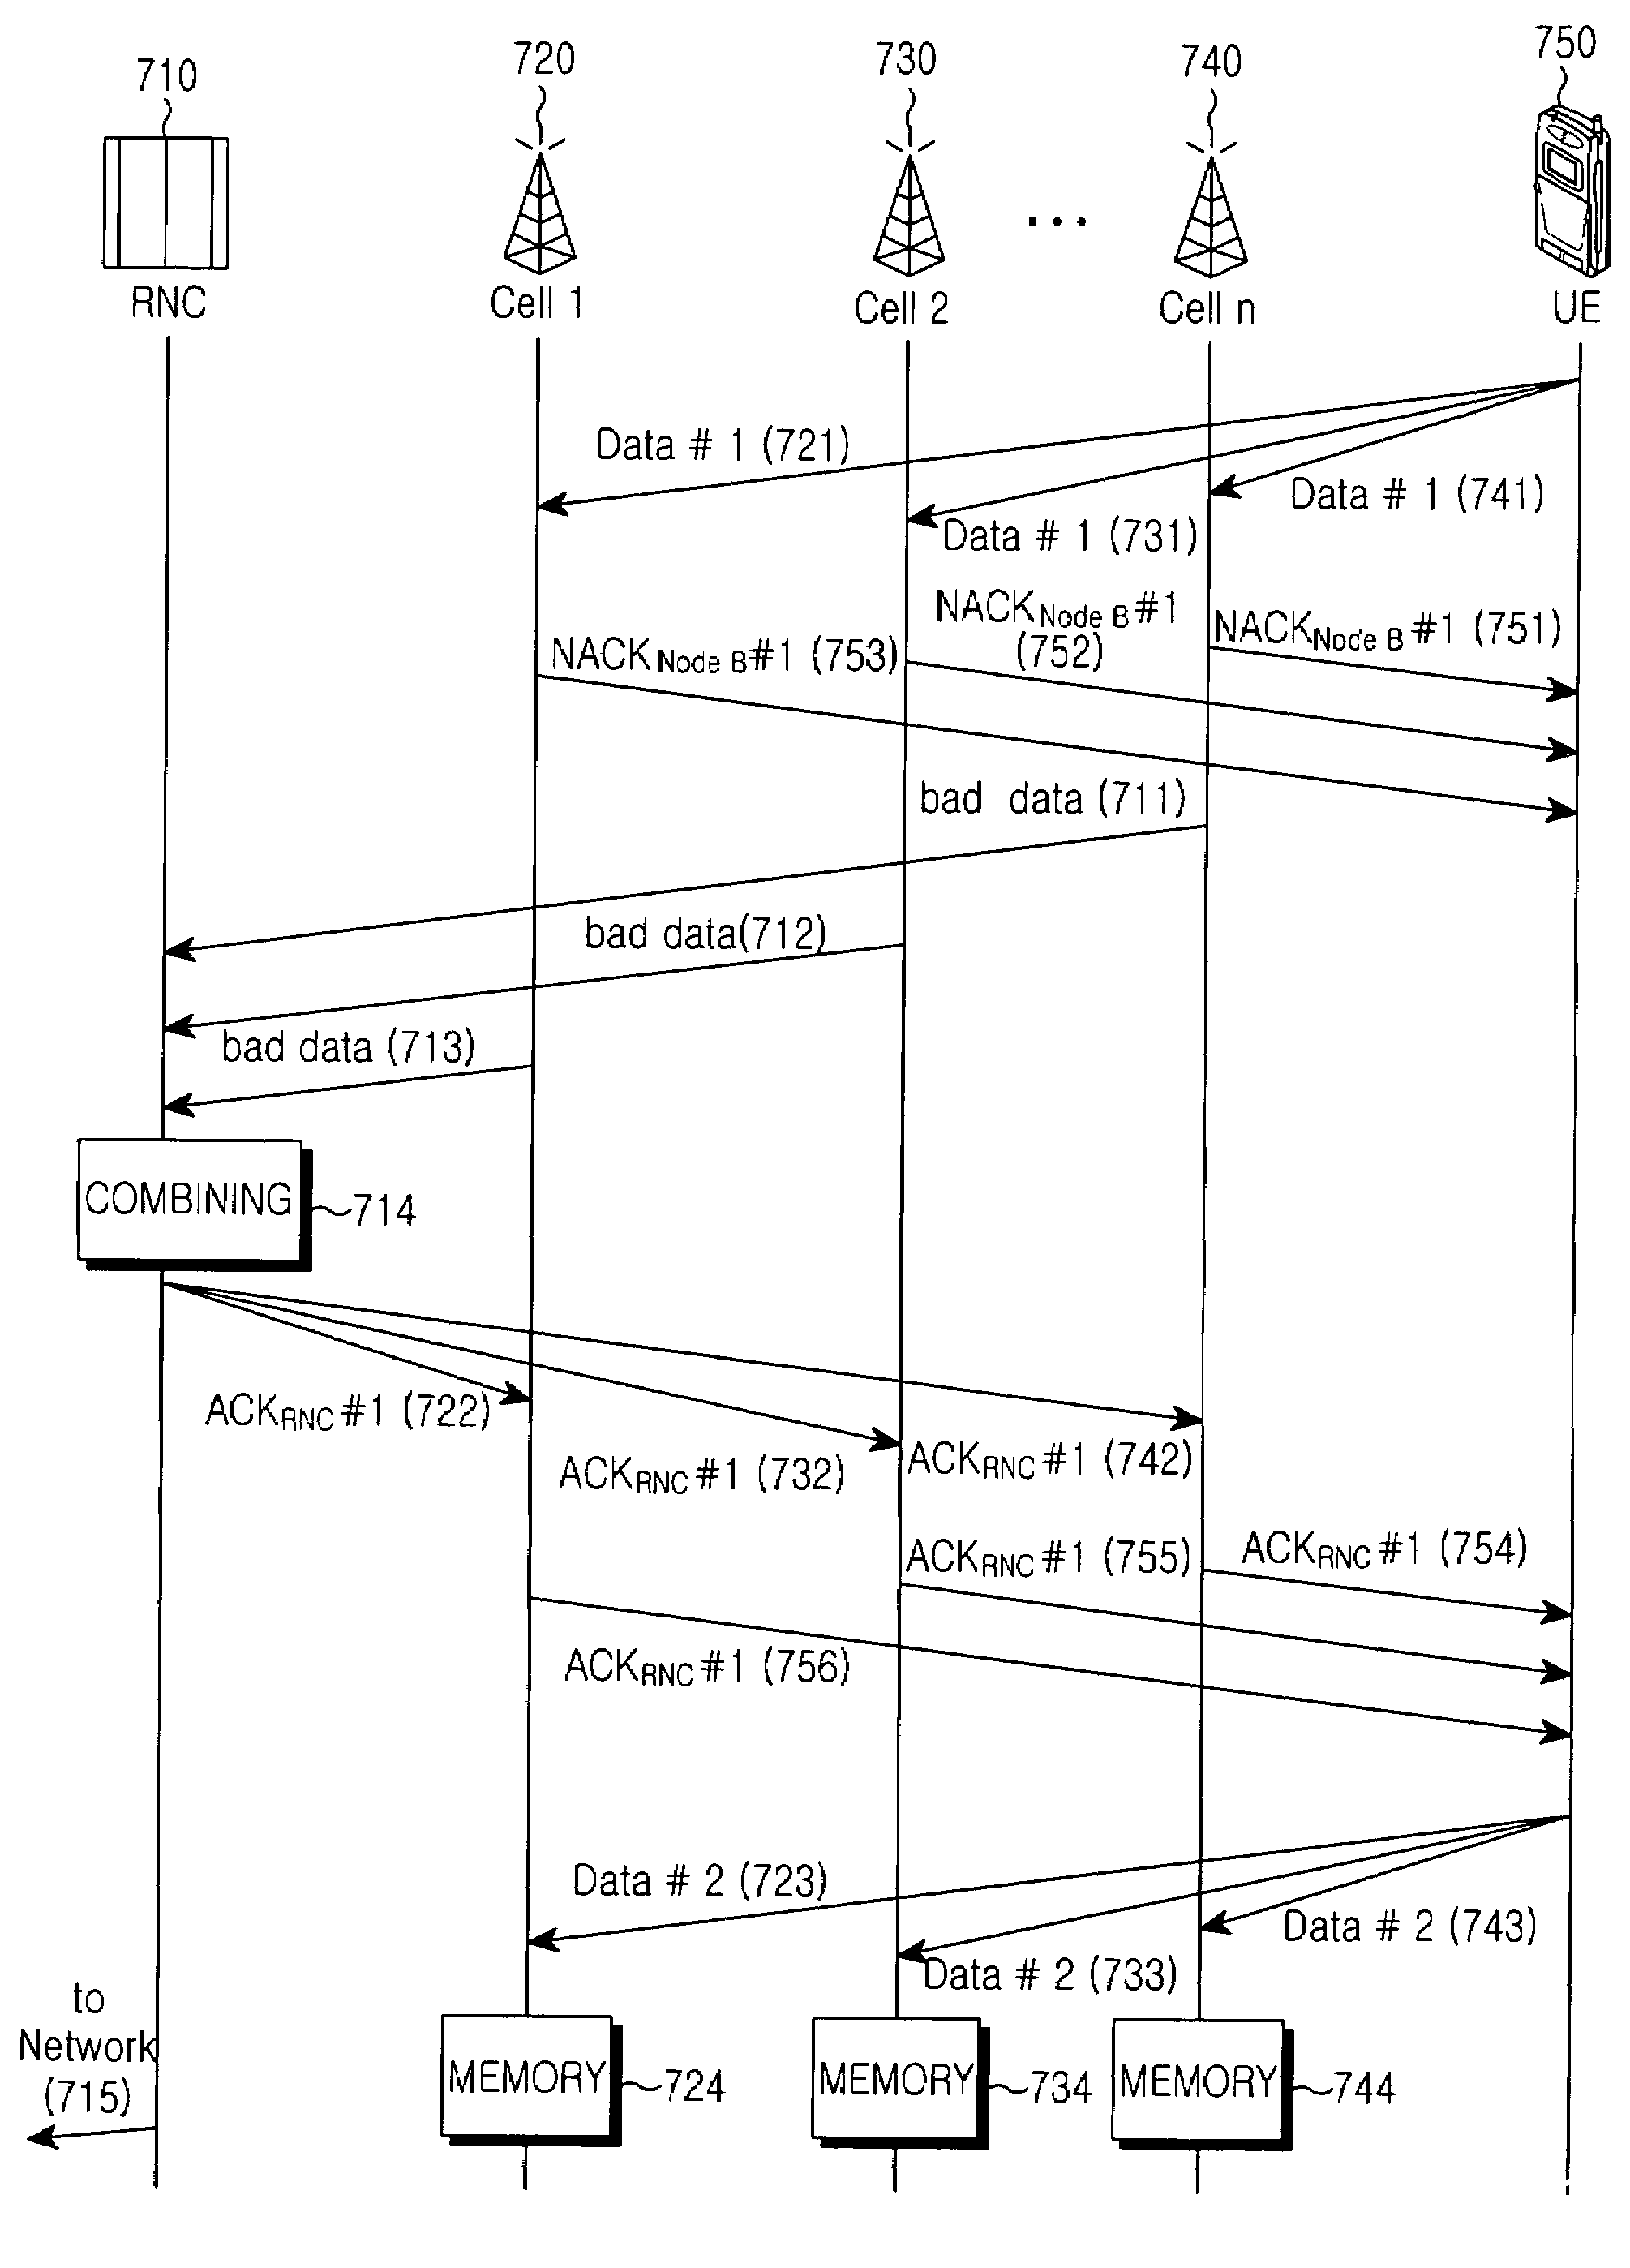 System and method for retransmitting uplink data from a mobile terminal in a soft handover region in an asynchronous CDMA mobile communication system servicing an enhanced uplink dedicated transport channel